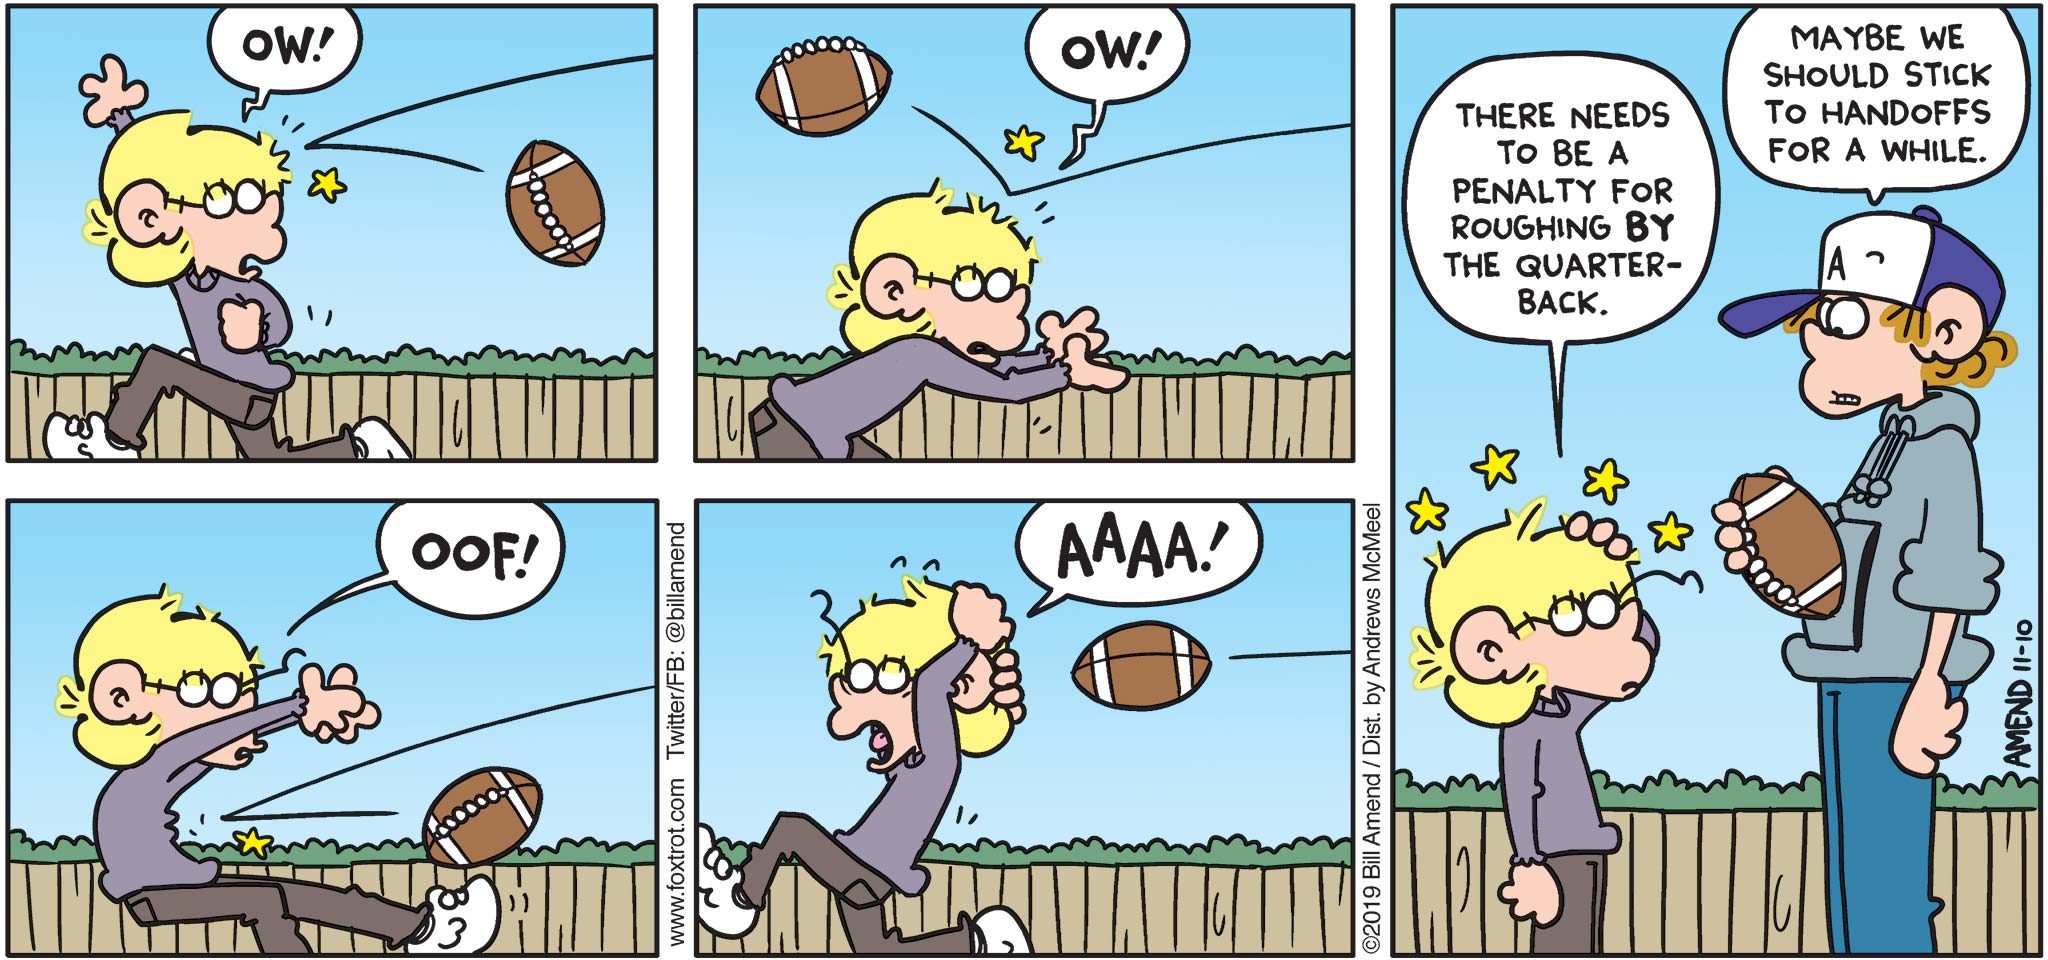 FoxTrot by Bill Amend - "Roughage" published November 10, 2019 - Jason: Ow! Ow! Oof! AAA! There needs to be a penalty for roughing by the quarterback. Peter: Maybe we should stick to handoffs for a while.